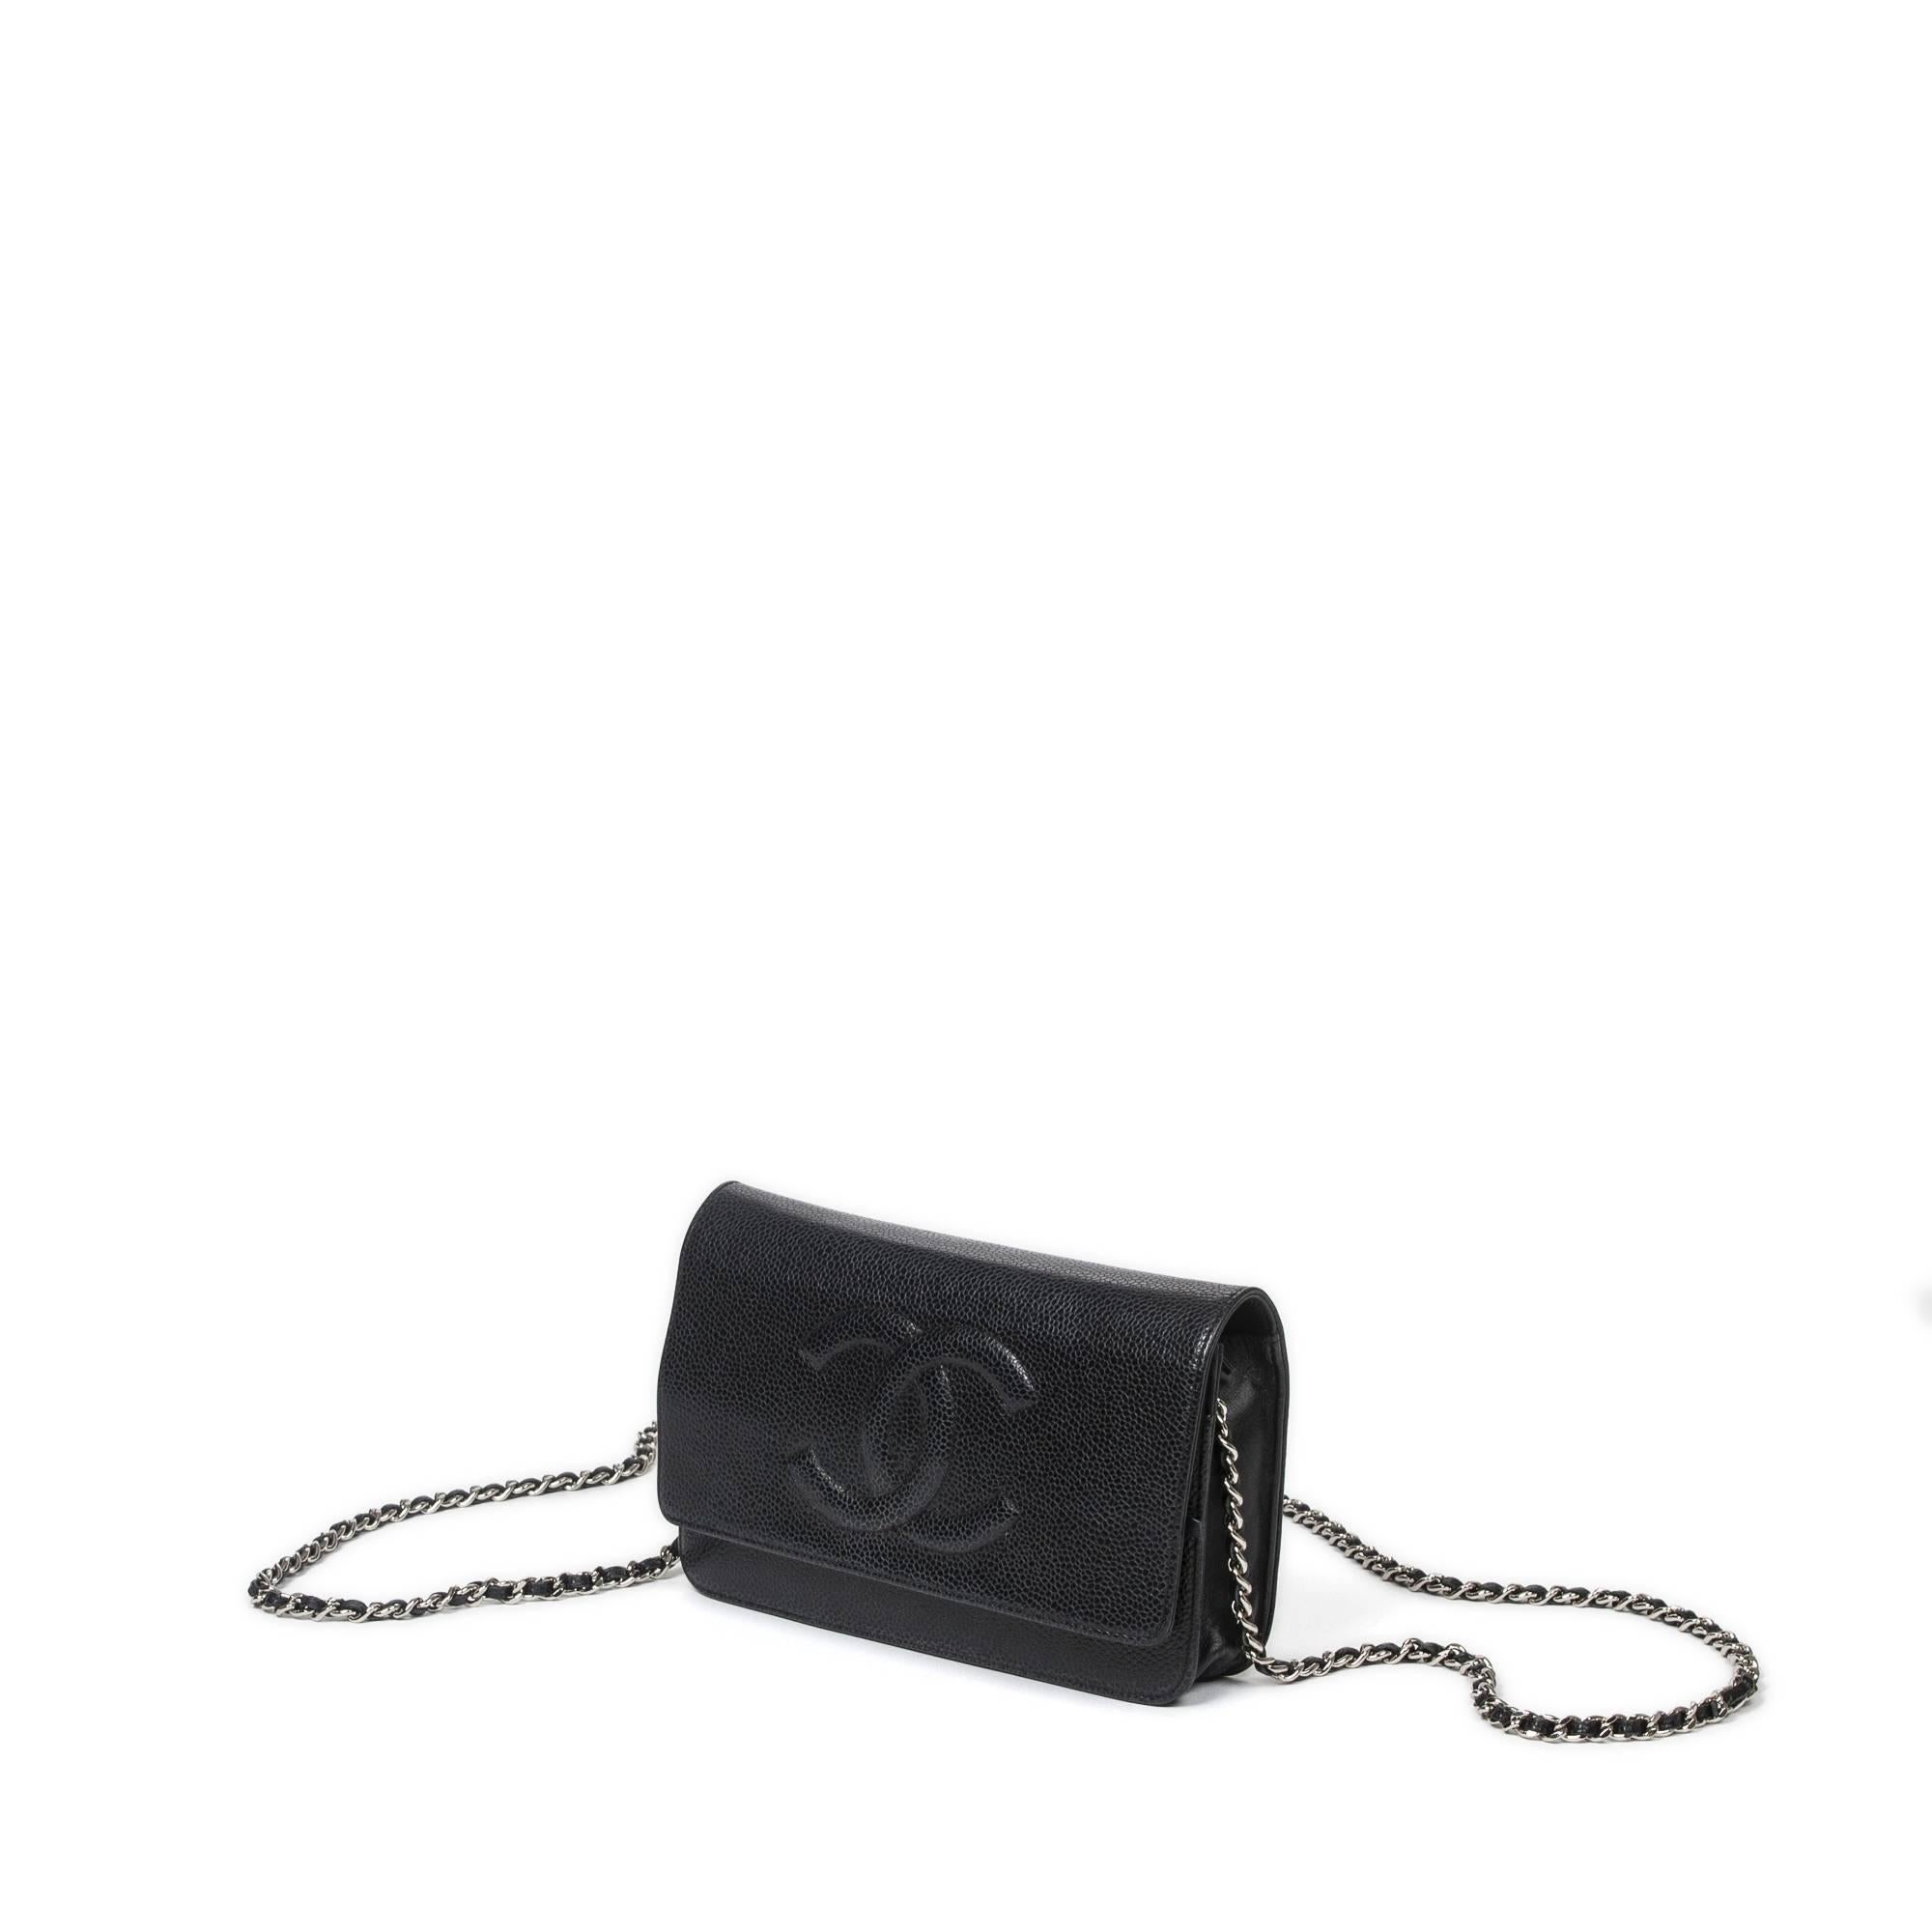 Chanel Caviar Timeless CC Wallet On Chain 19cm in black grained leather with long chain strap interlaced with black leather (60cm), silver tone hardware. Snap button closure. Black canvas lined interior with 2 zip pockets, 2 slip pockets and 6 card